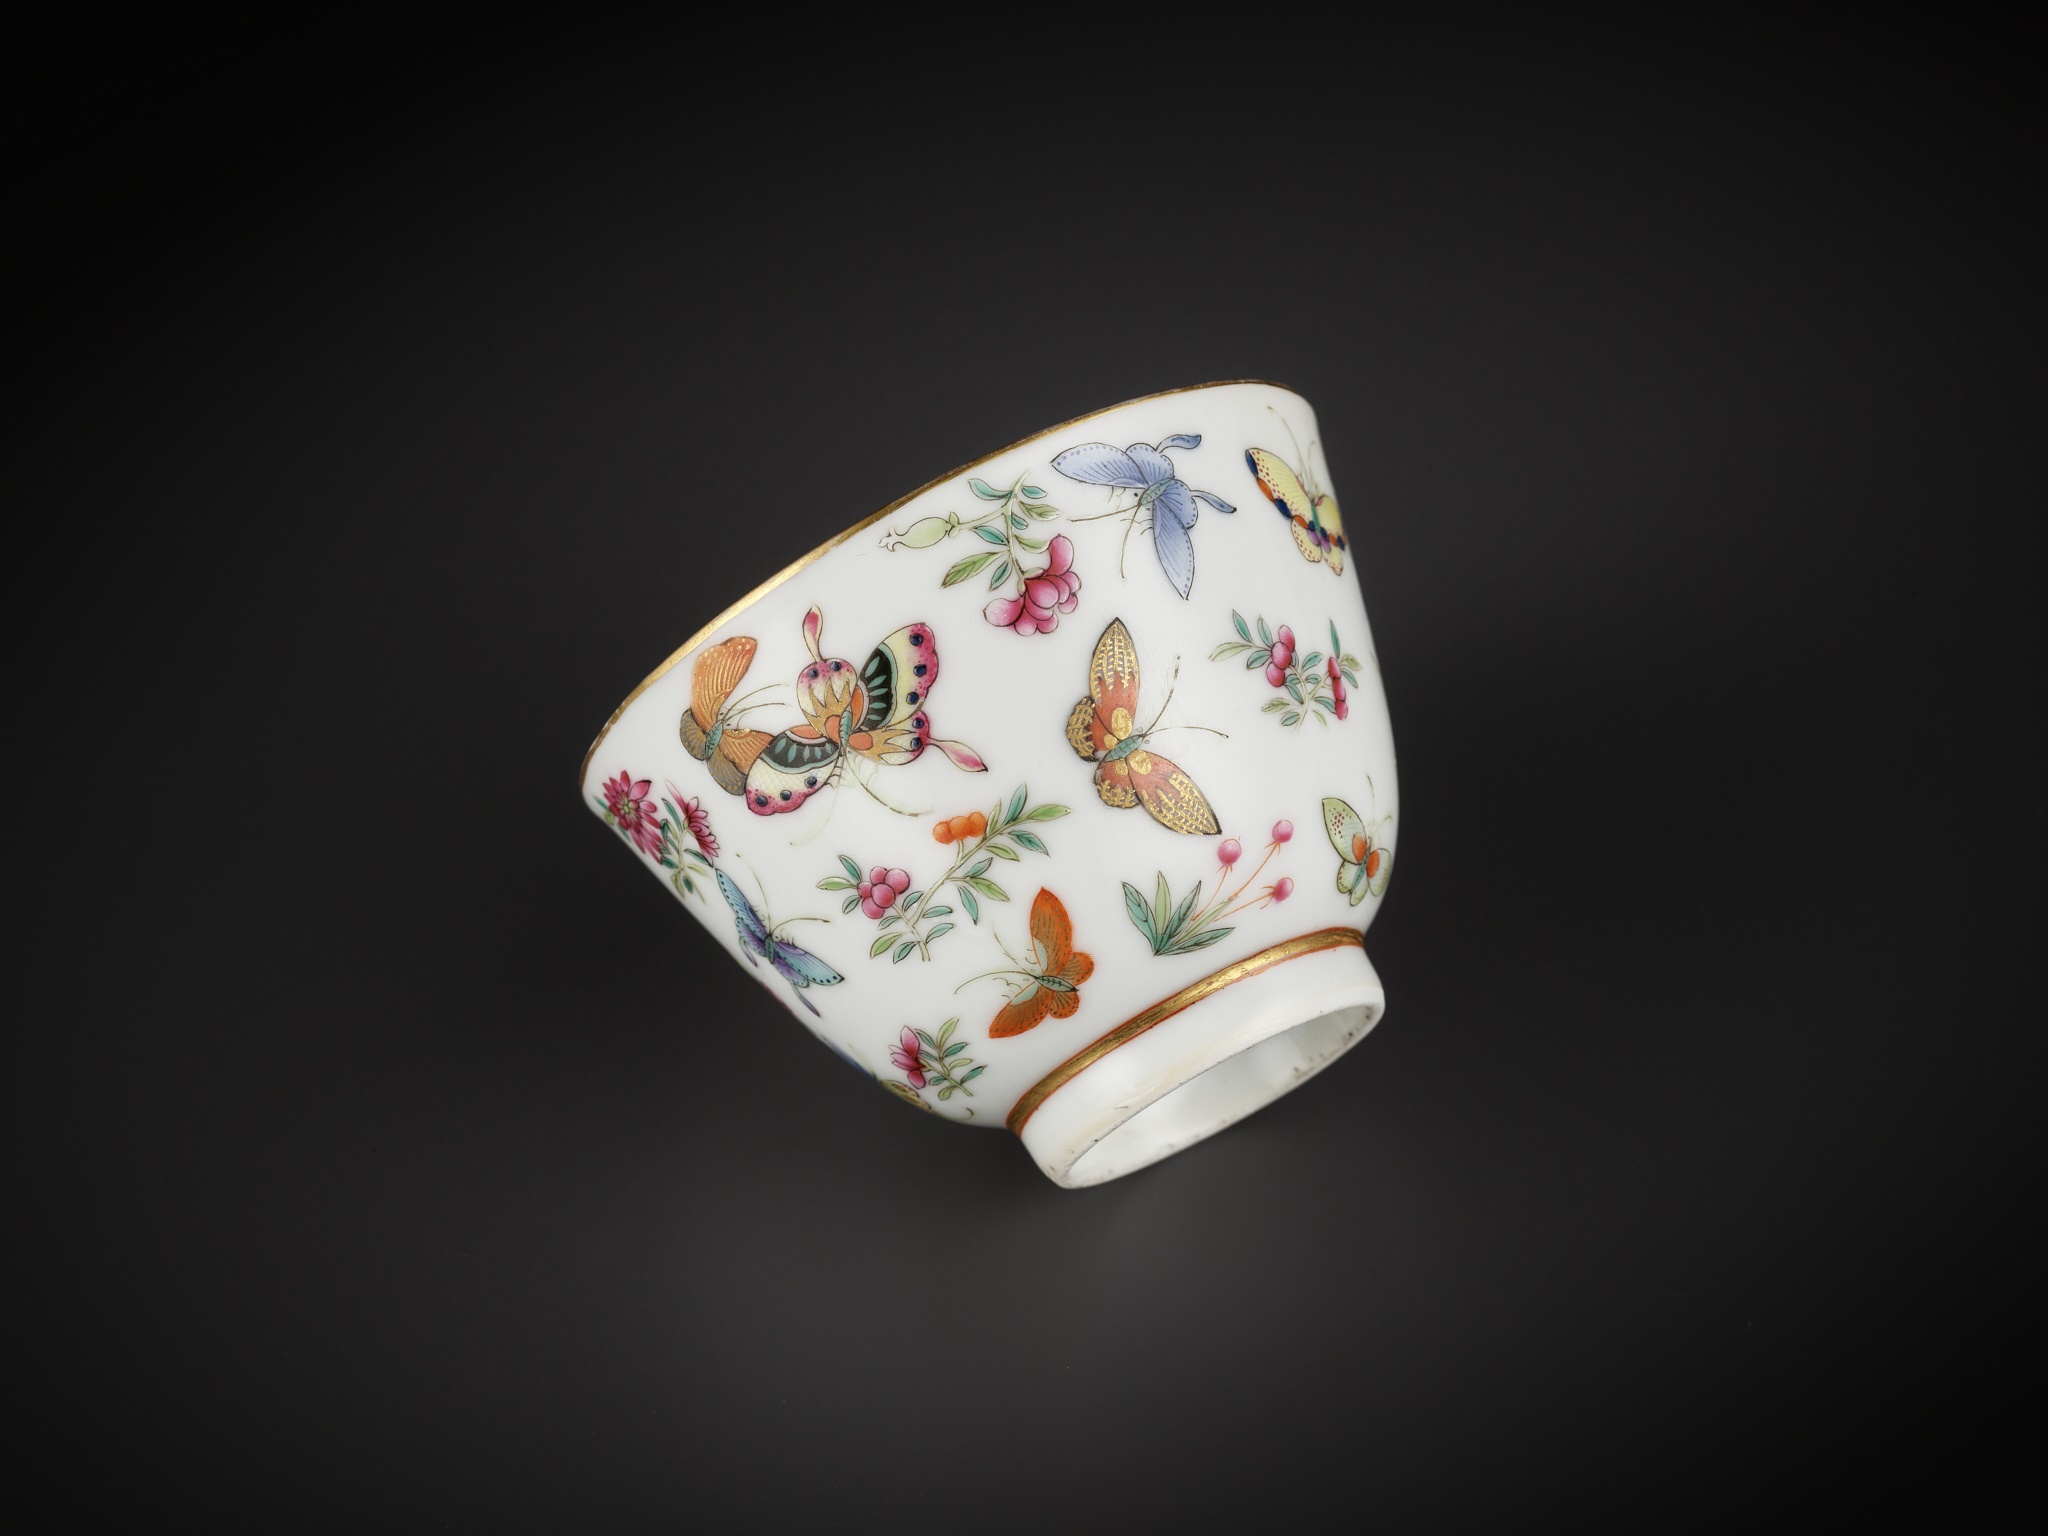 A SUPERB PAIR OF FAMILLE ROSE 'BUTTERFLY' BOWLS, GUANGXU MARKS AND PERIOD - Image 13 of 13